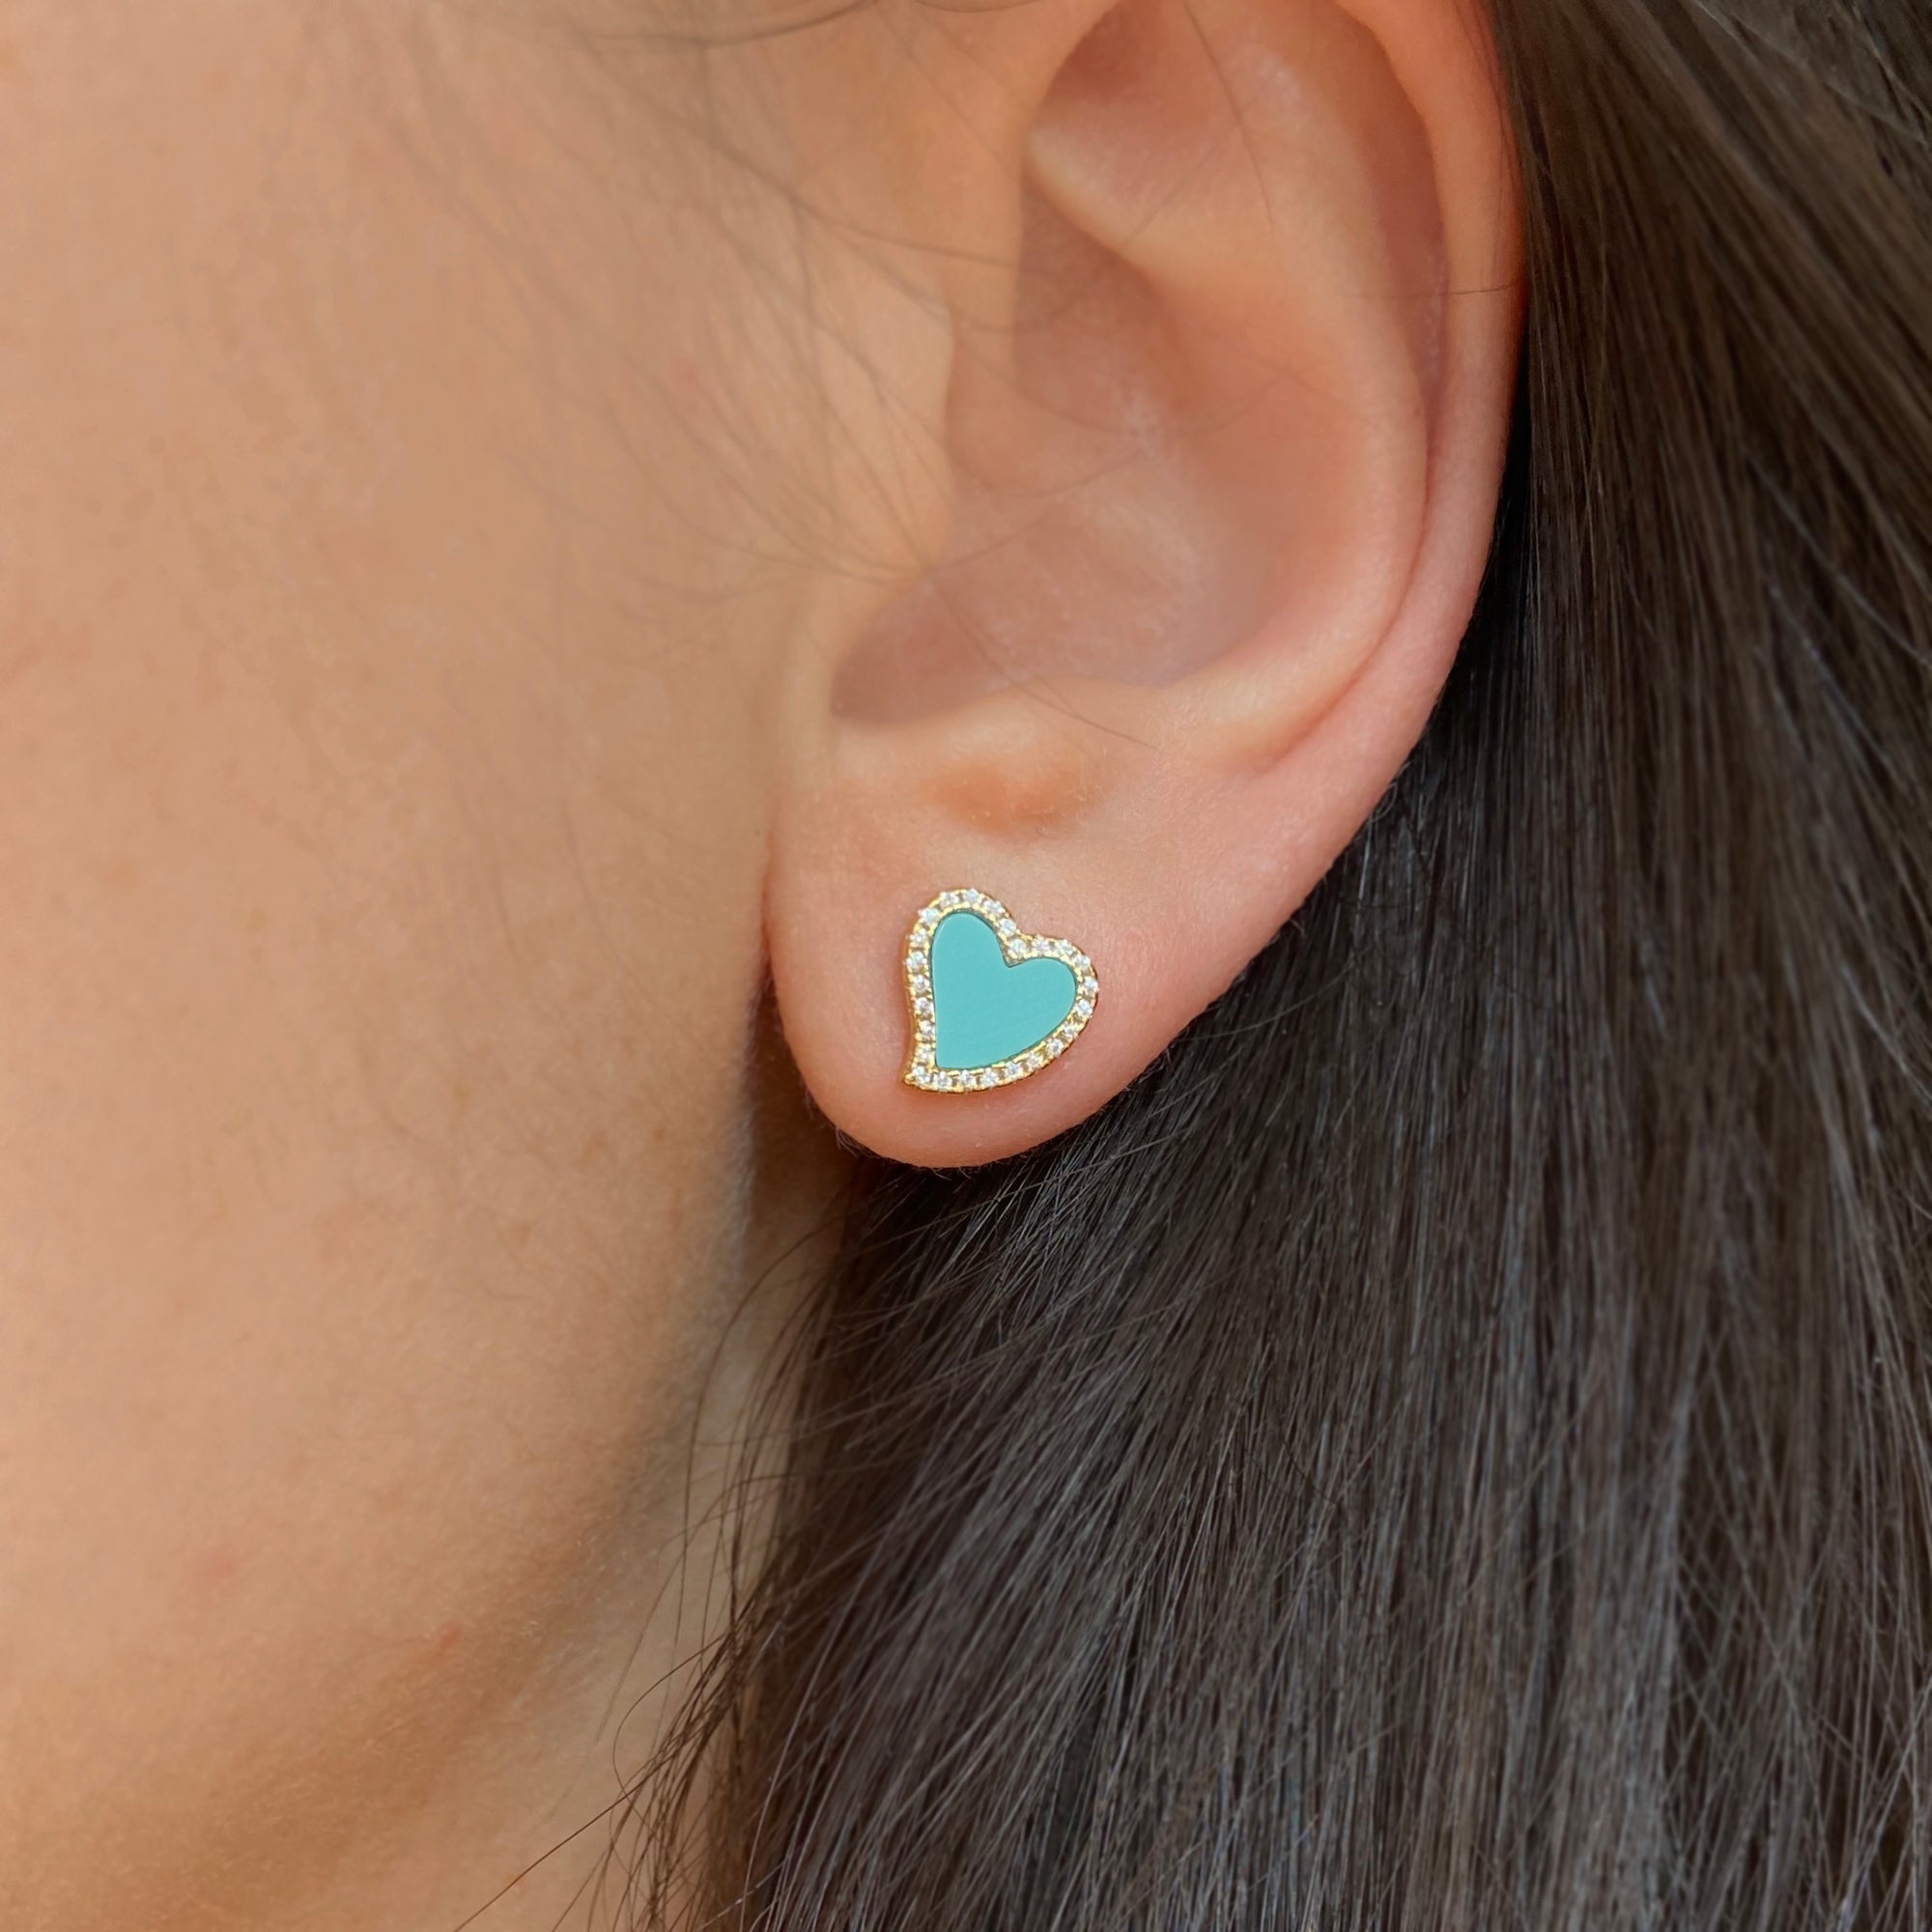 Turquoise amore heart stud earrings in gold with crystals